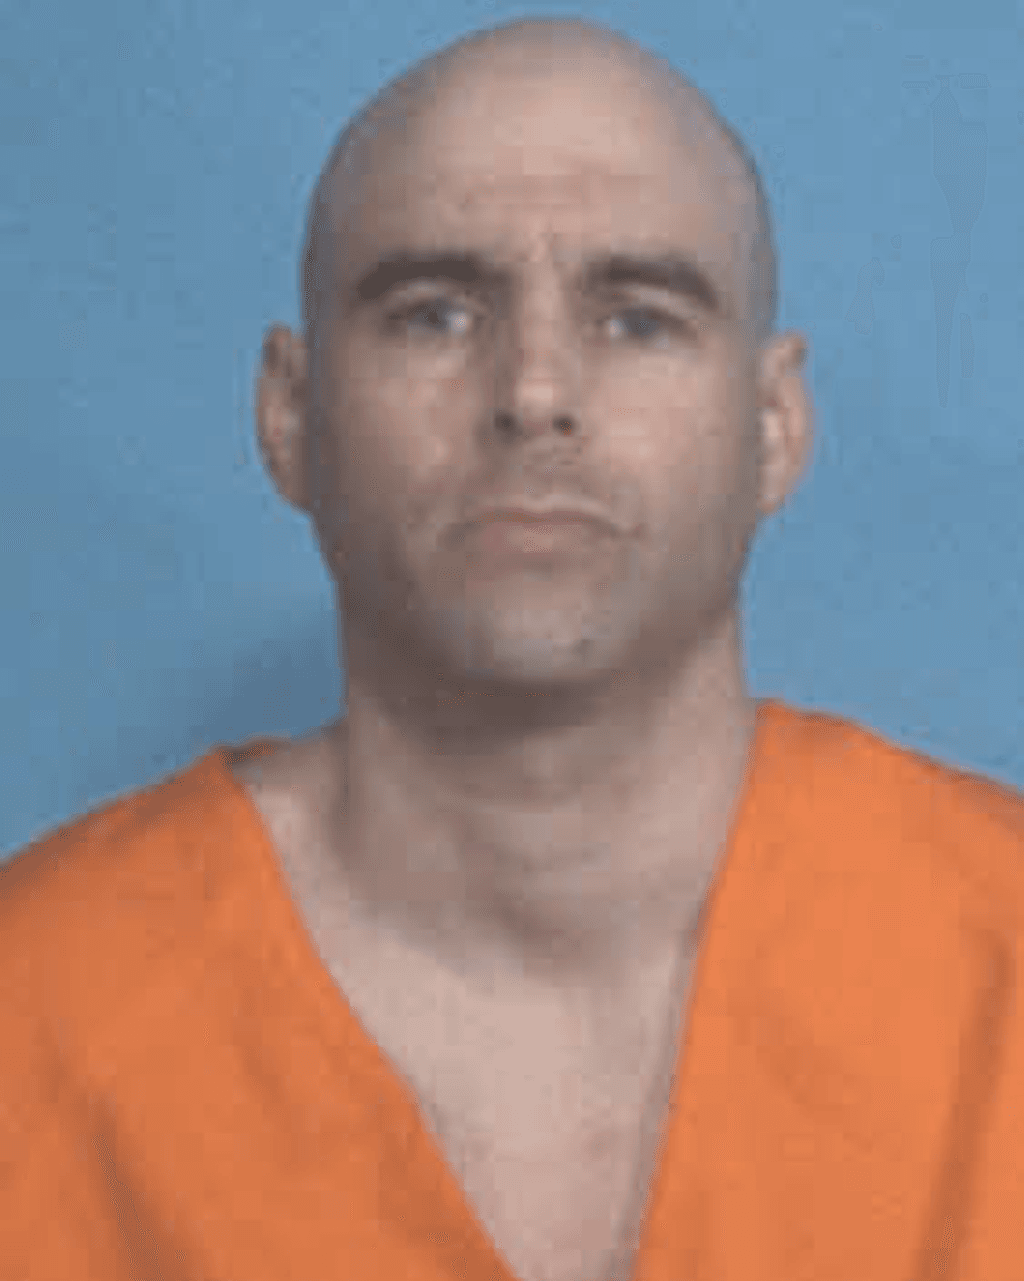 Florida Supreme Court Upholds Death Sentence Imposed in Violation of State and Federal Constitutions